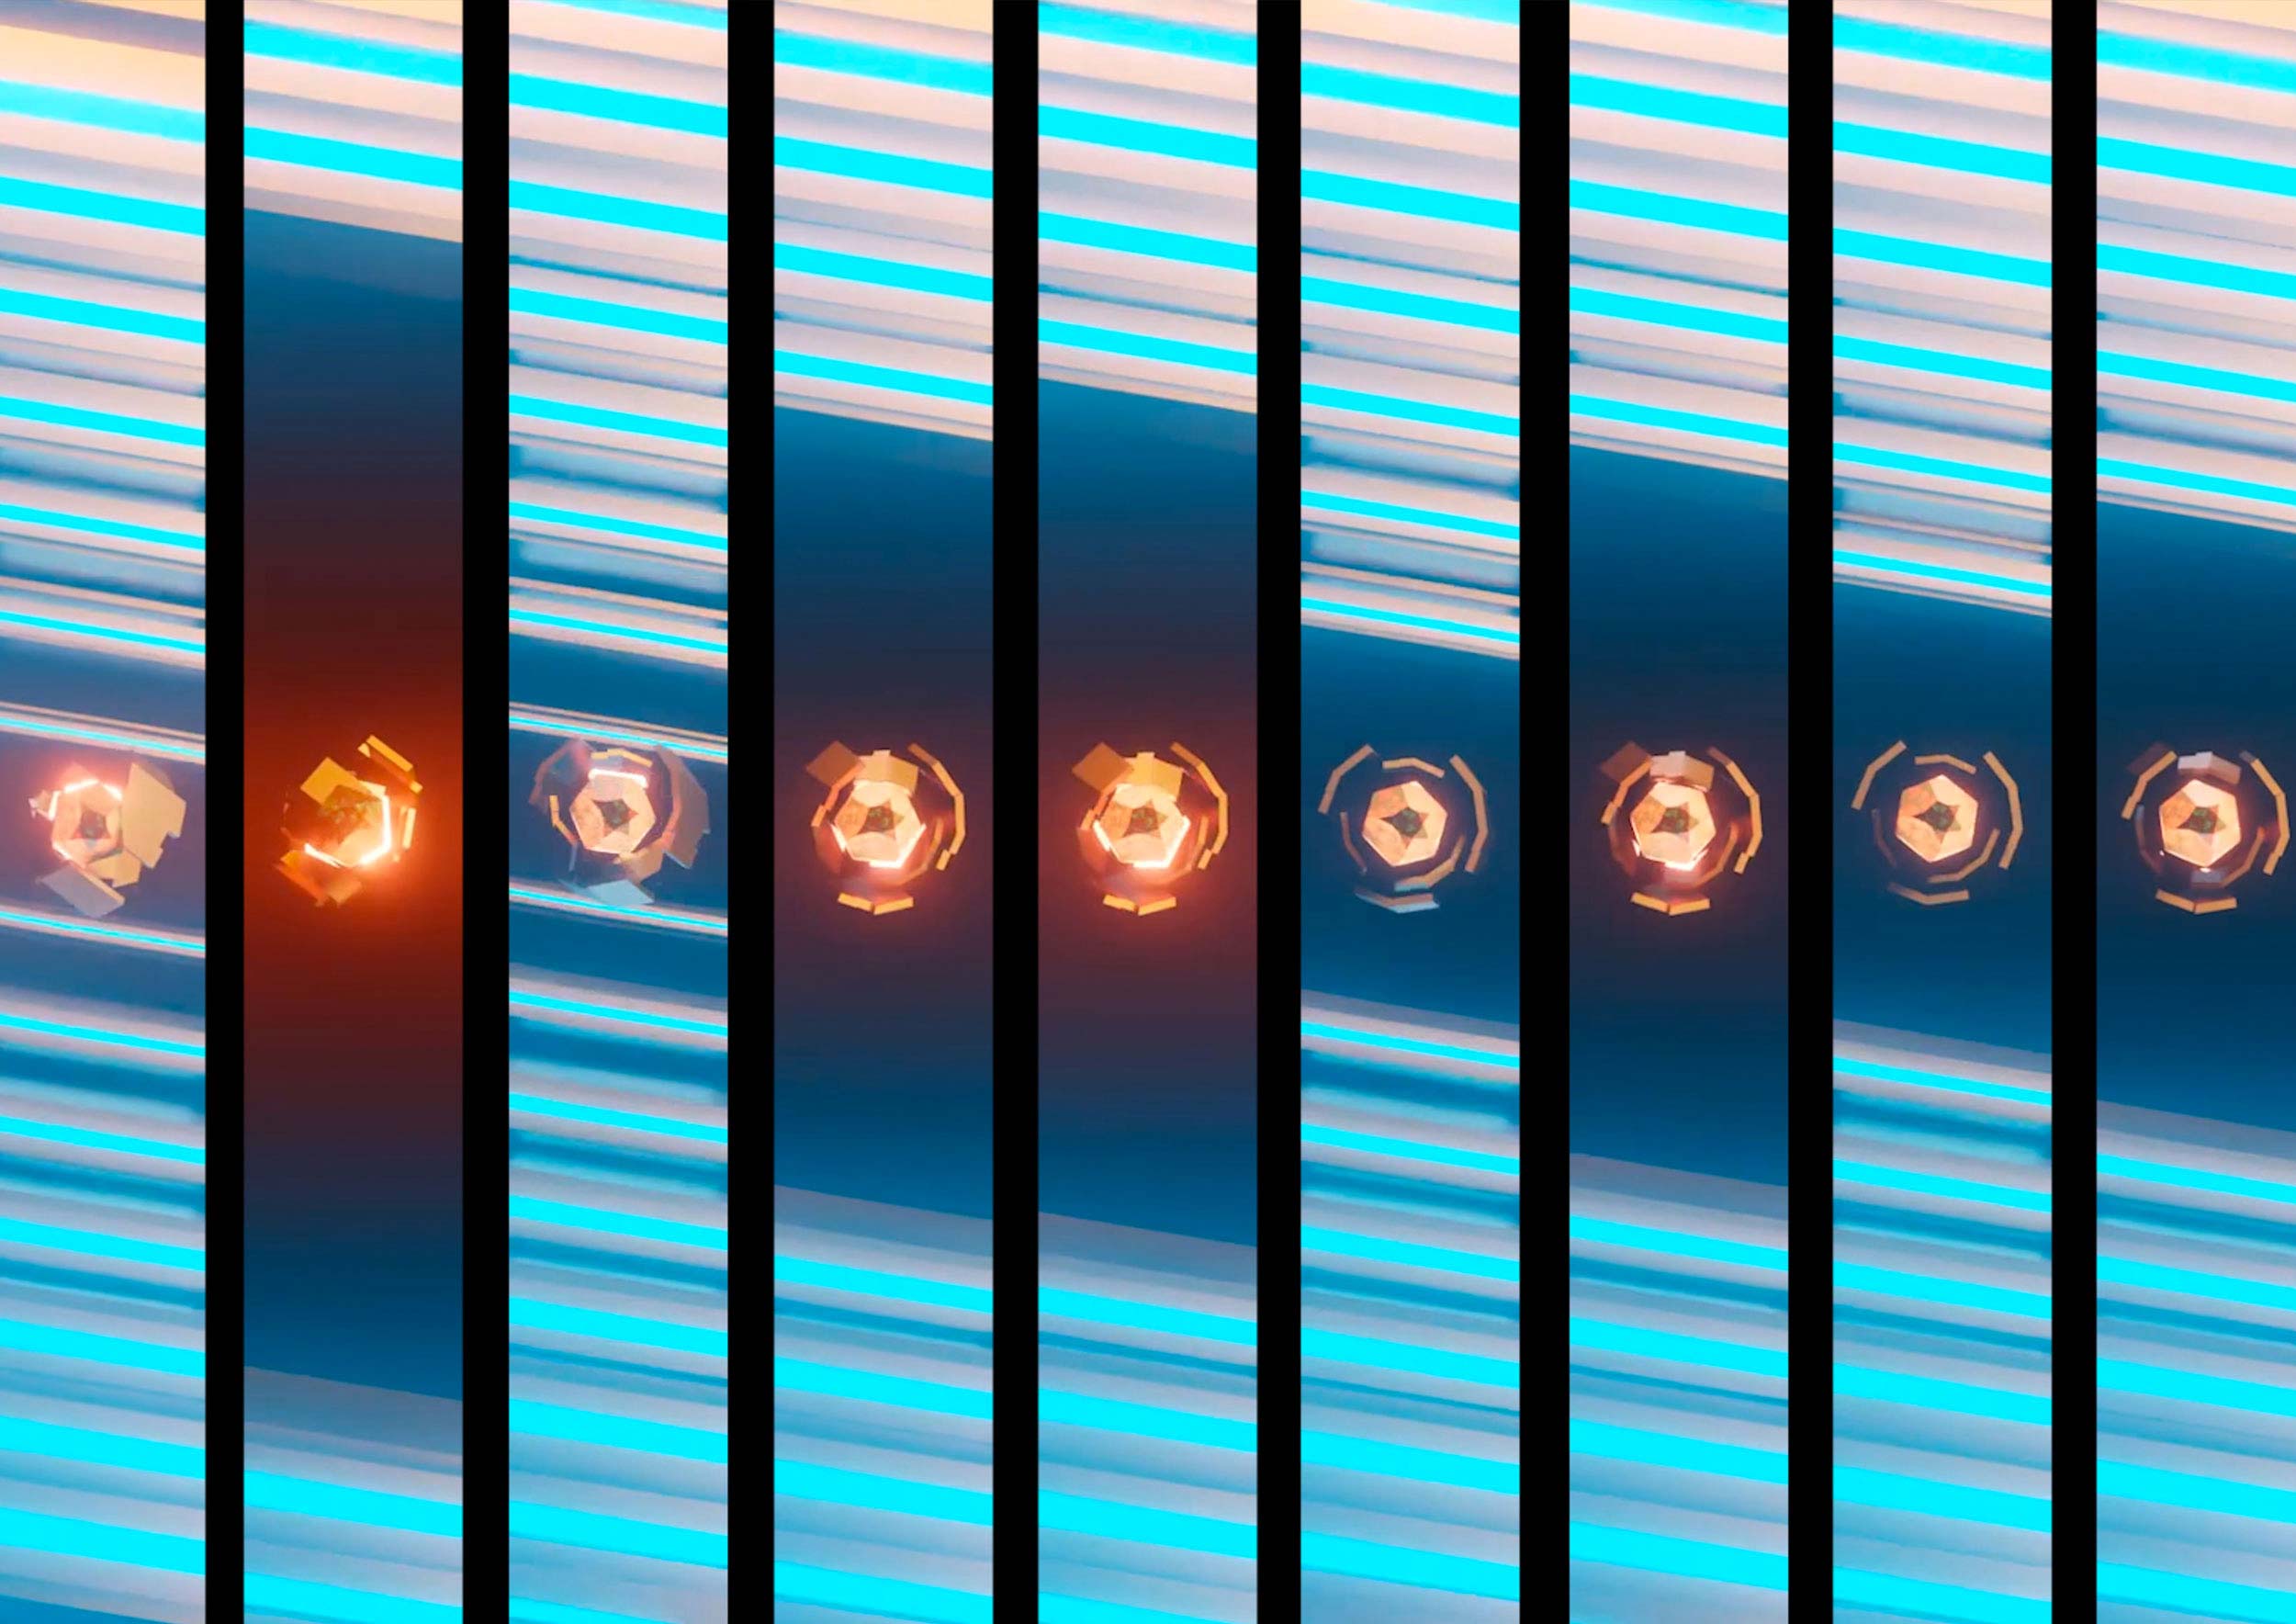 The digitally rendered image is divided into 9 vertical columns. Each column has a copper coloured circular shape. There are a series of blue hormonal stripes in each of the vertical columns.